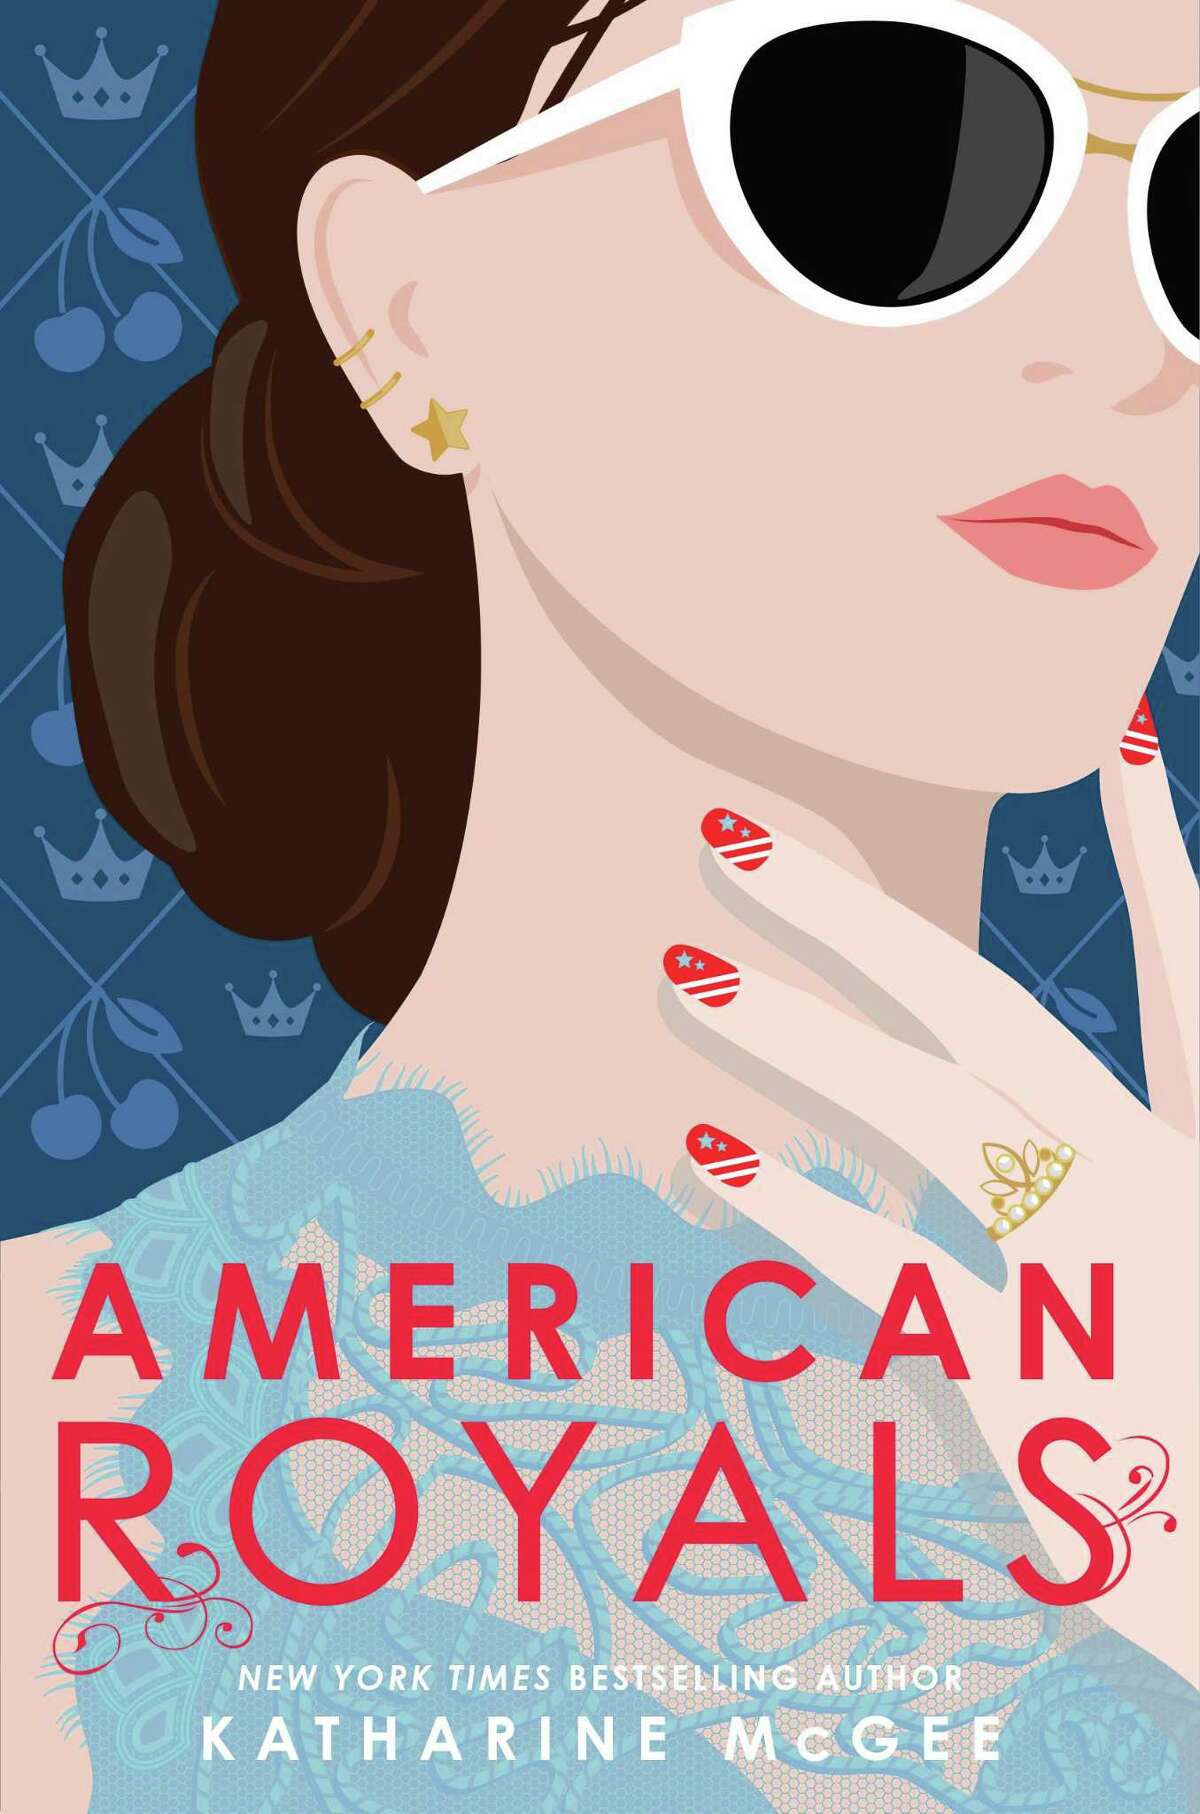 American Royals, by Houston native Katharine McGee was published by Random House this September.